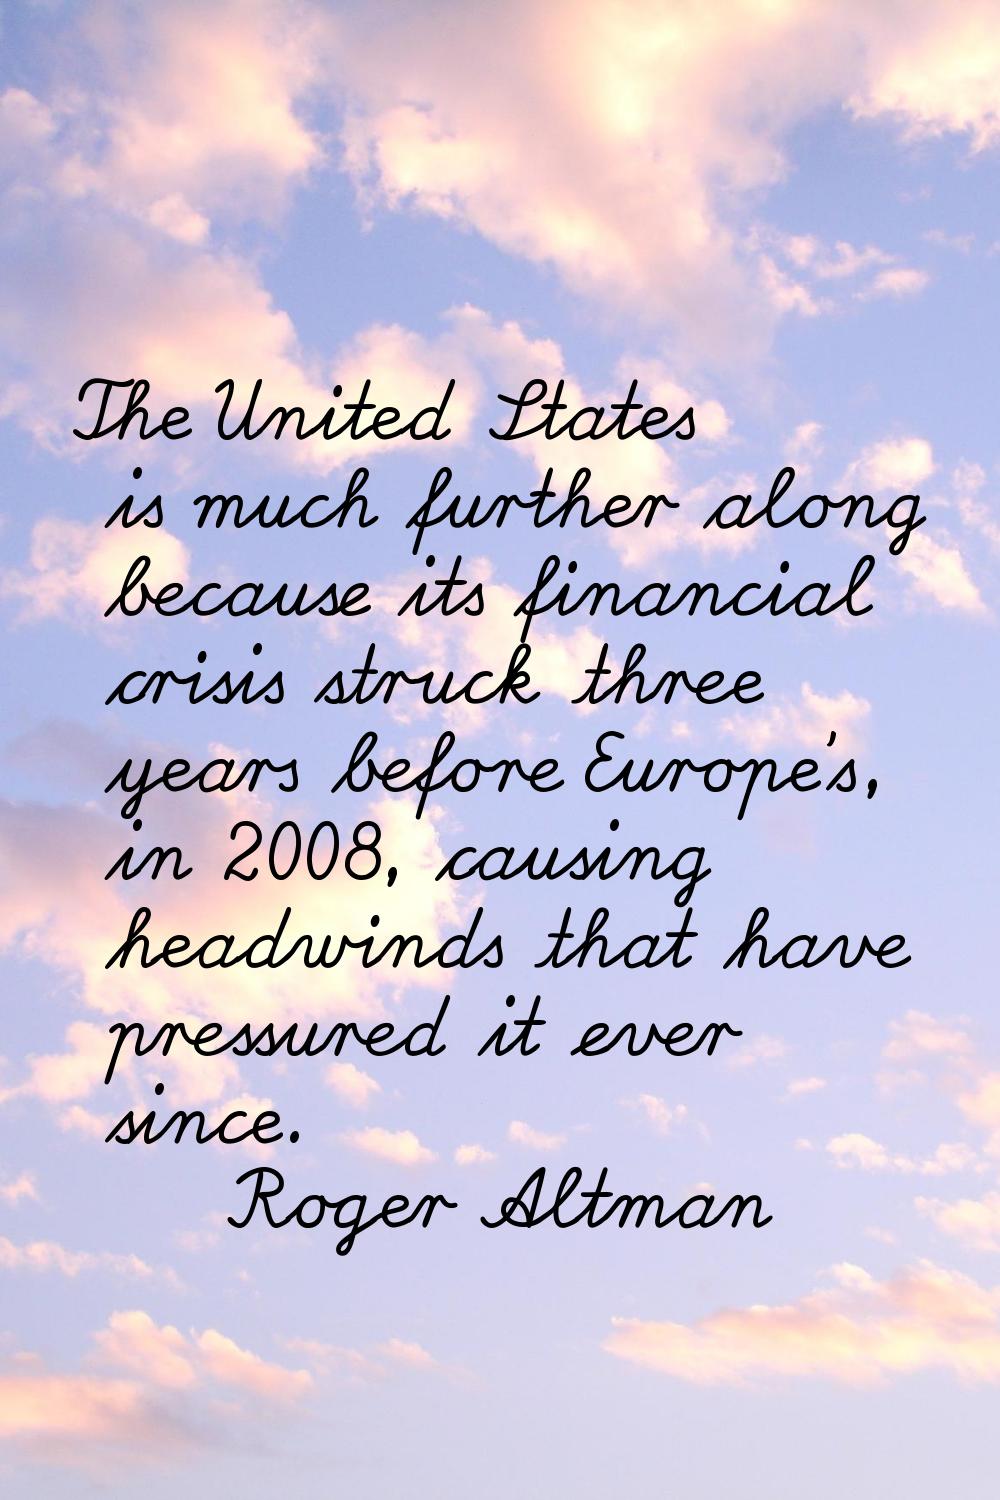 The United States is much further along because its financial crisis struck three years before Euro